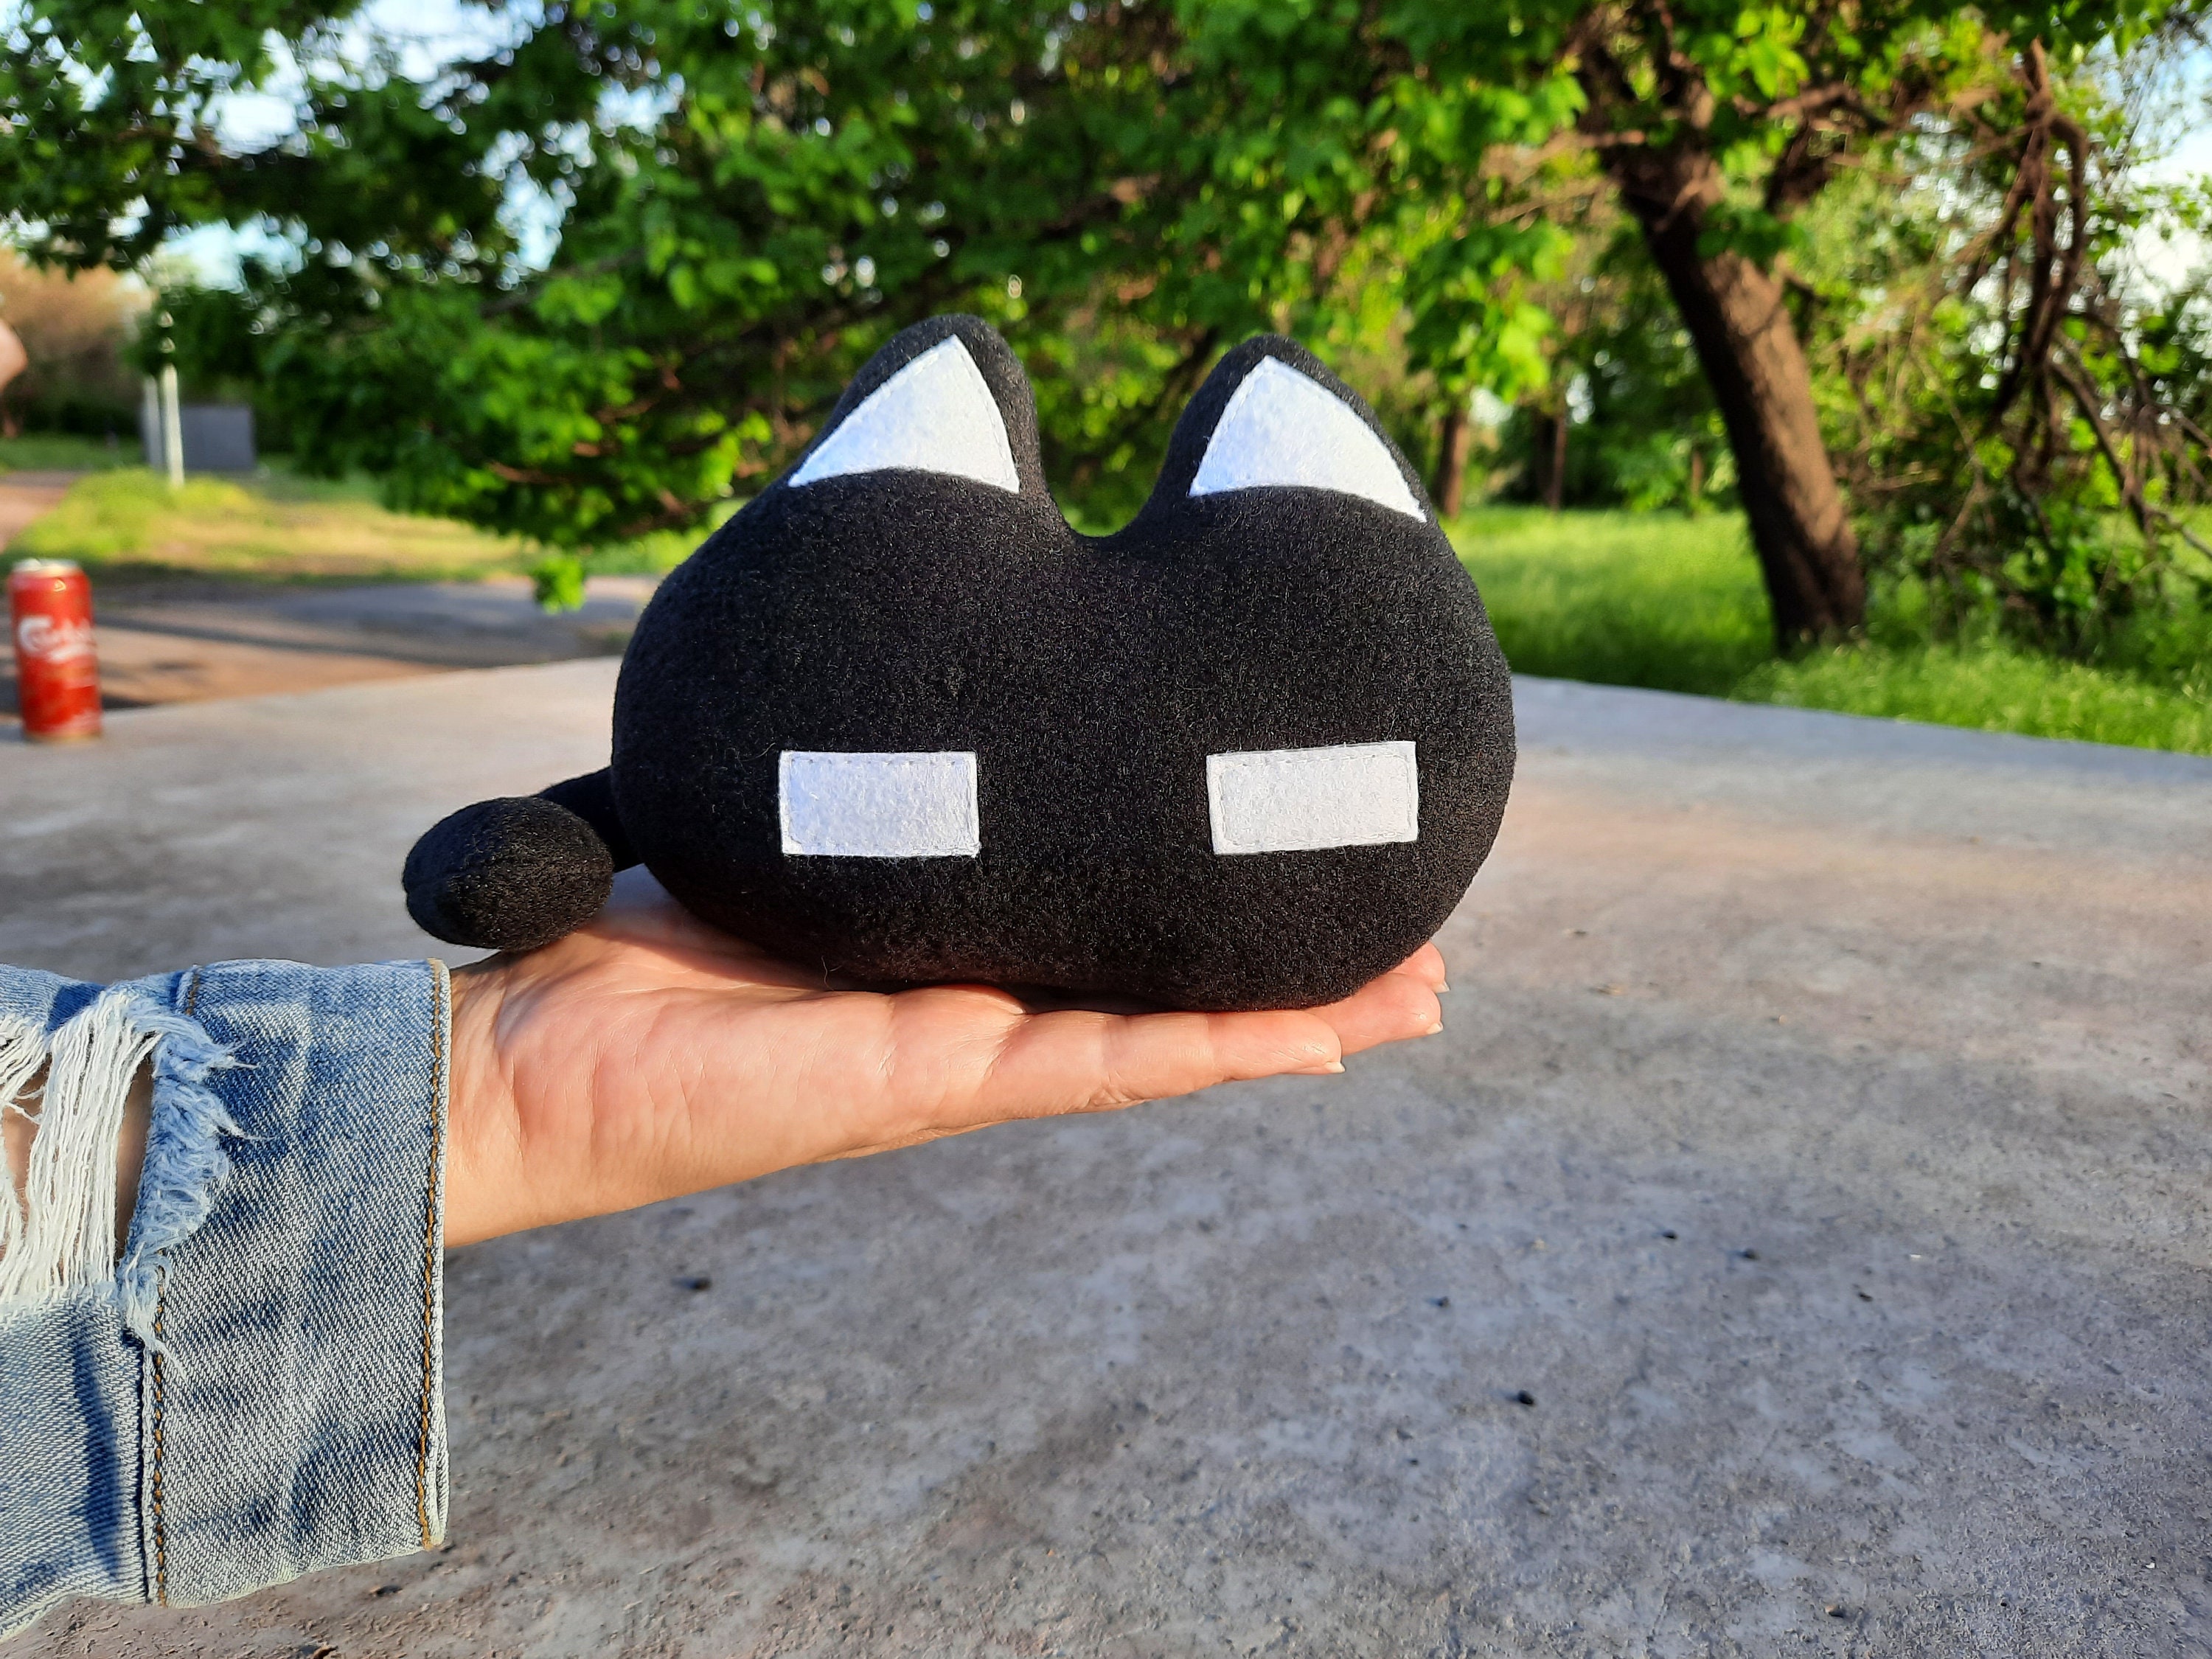 Omori Plush Toy 7.9 Game Figure Plushie Toys Beautifully Plush Stuffed  Doll for Fans Gifts 